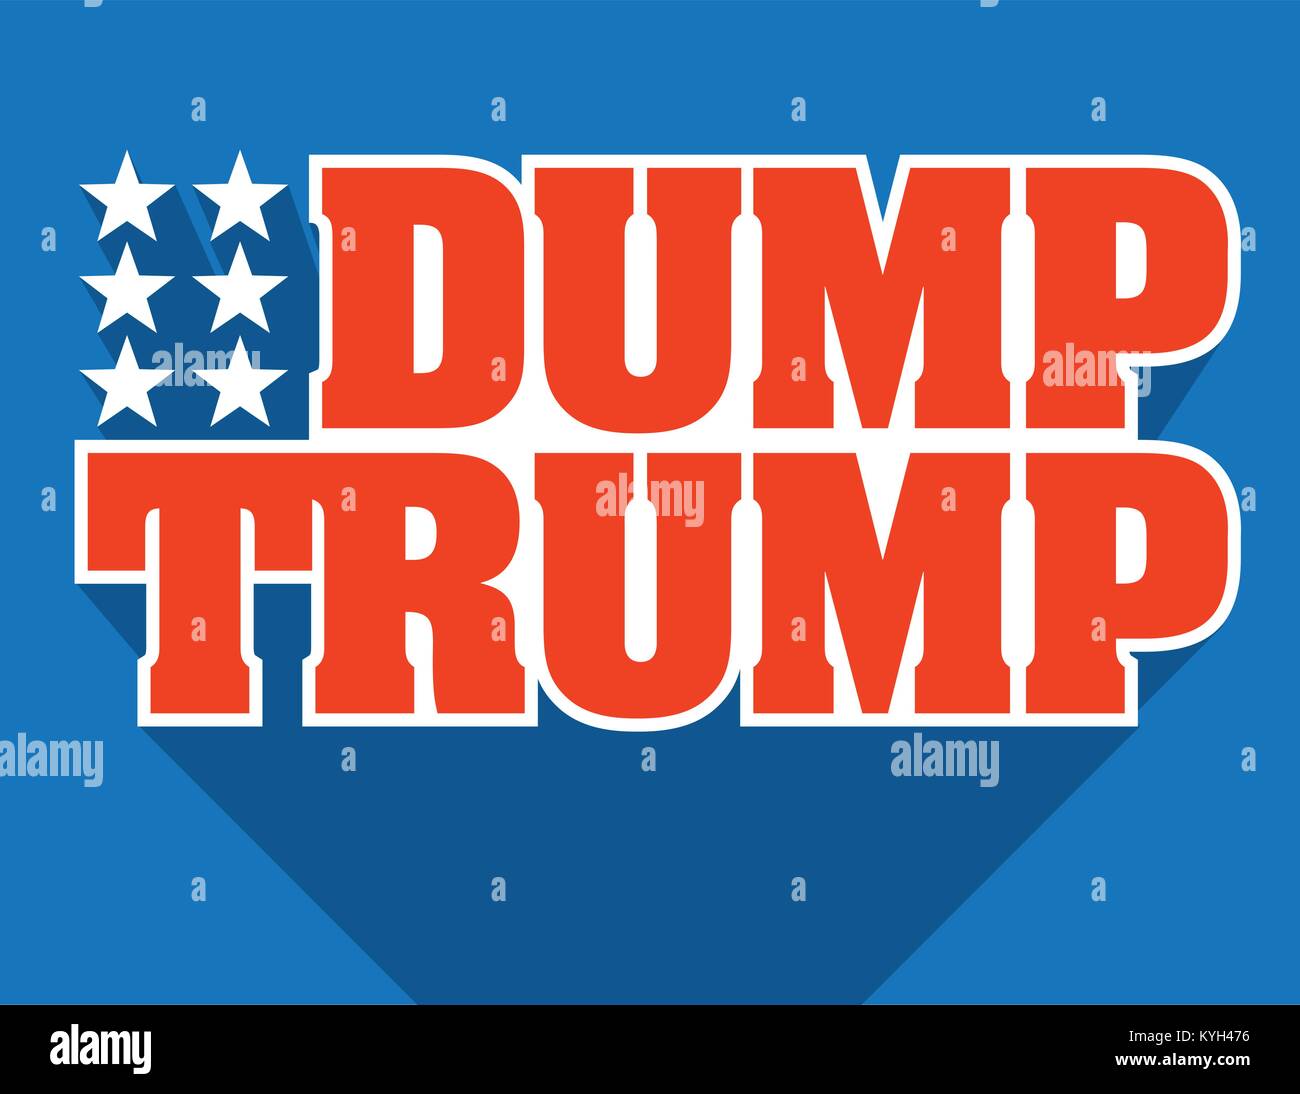 Dump Trump Badge or Emblem Vector Design. Red white and blue typographic design protesting Donald Trump’s presidency with the words Dump Trump. Stock Vector